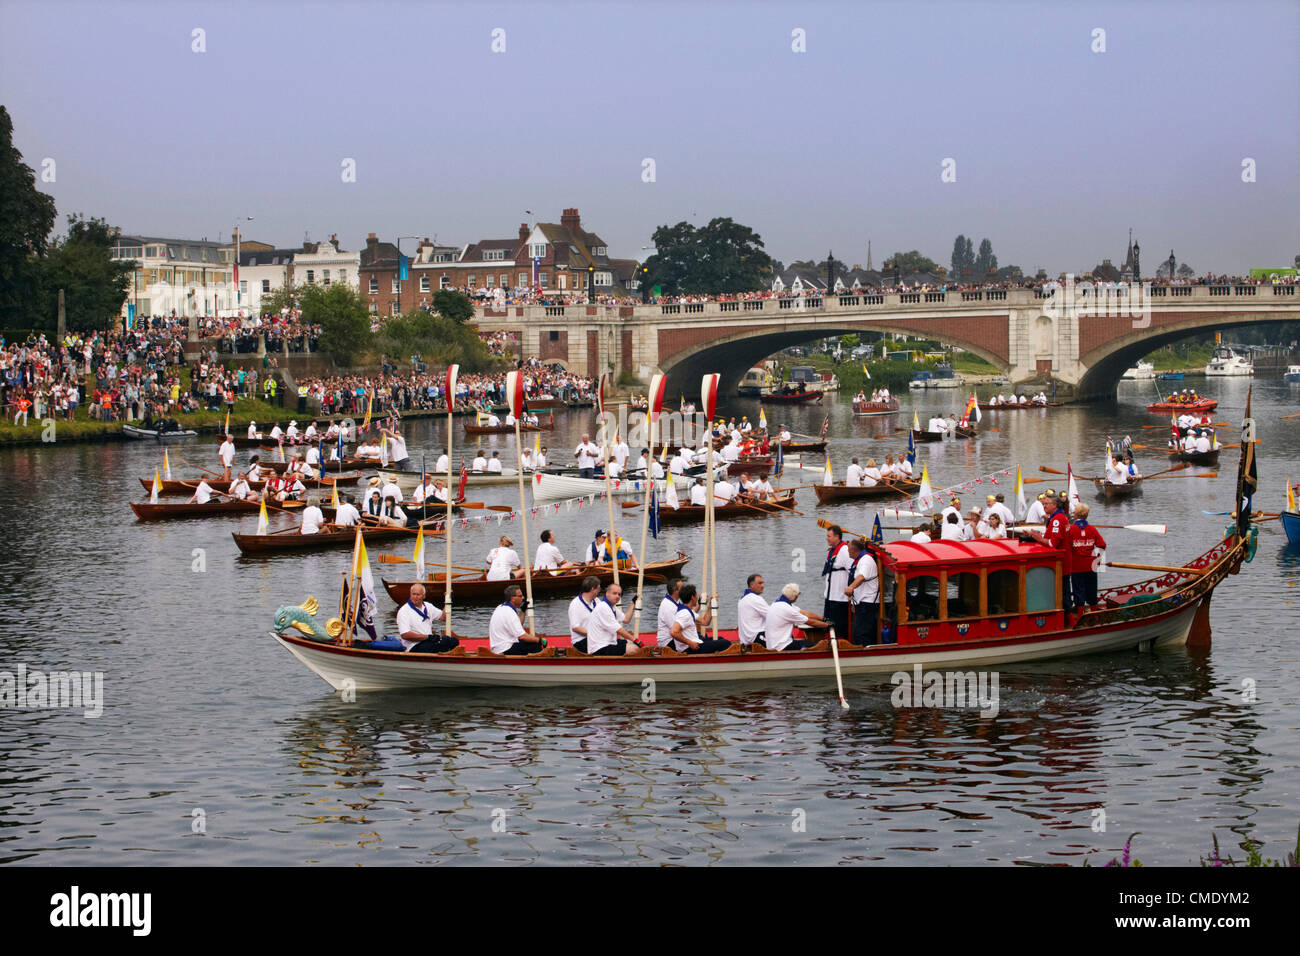 Friday 27 July, 2012. Flotilla of boats on River Thames at Hampton Court Bridge, waiting to follow the Olympic flame downstream to London. England. Credit:  Cephas Picture Library / Alamy Live News. Stock Photo